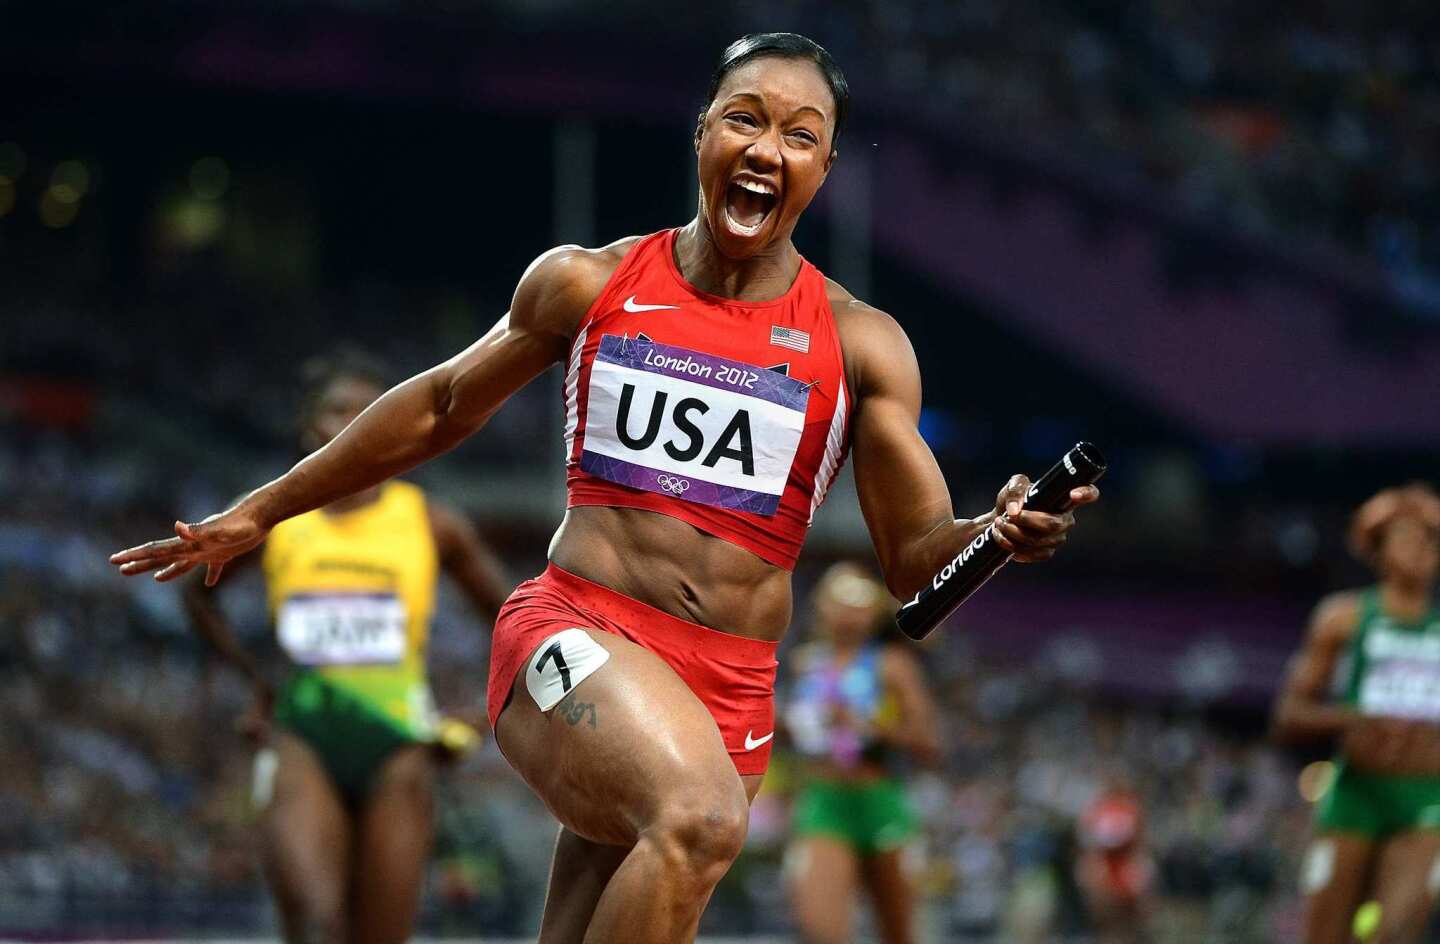 Carmelita Jeter crosses the finish line as anchor of the U.S. 4x100 relay team after it sets a world record of 40.82 seconds.